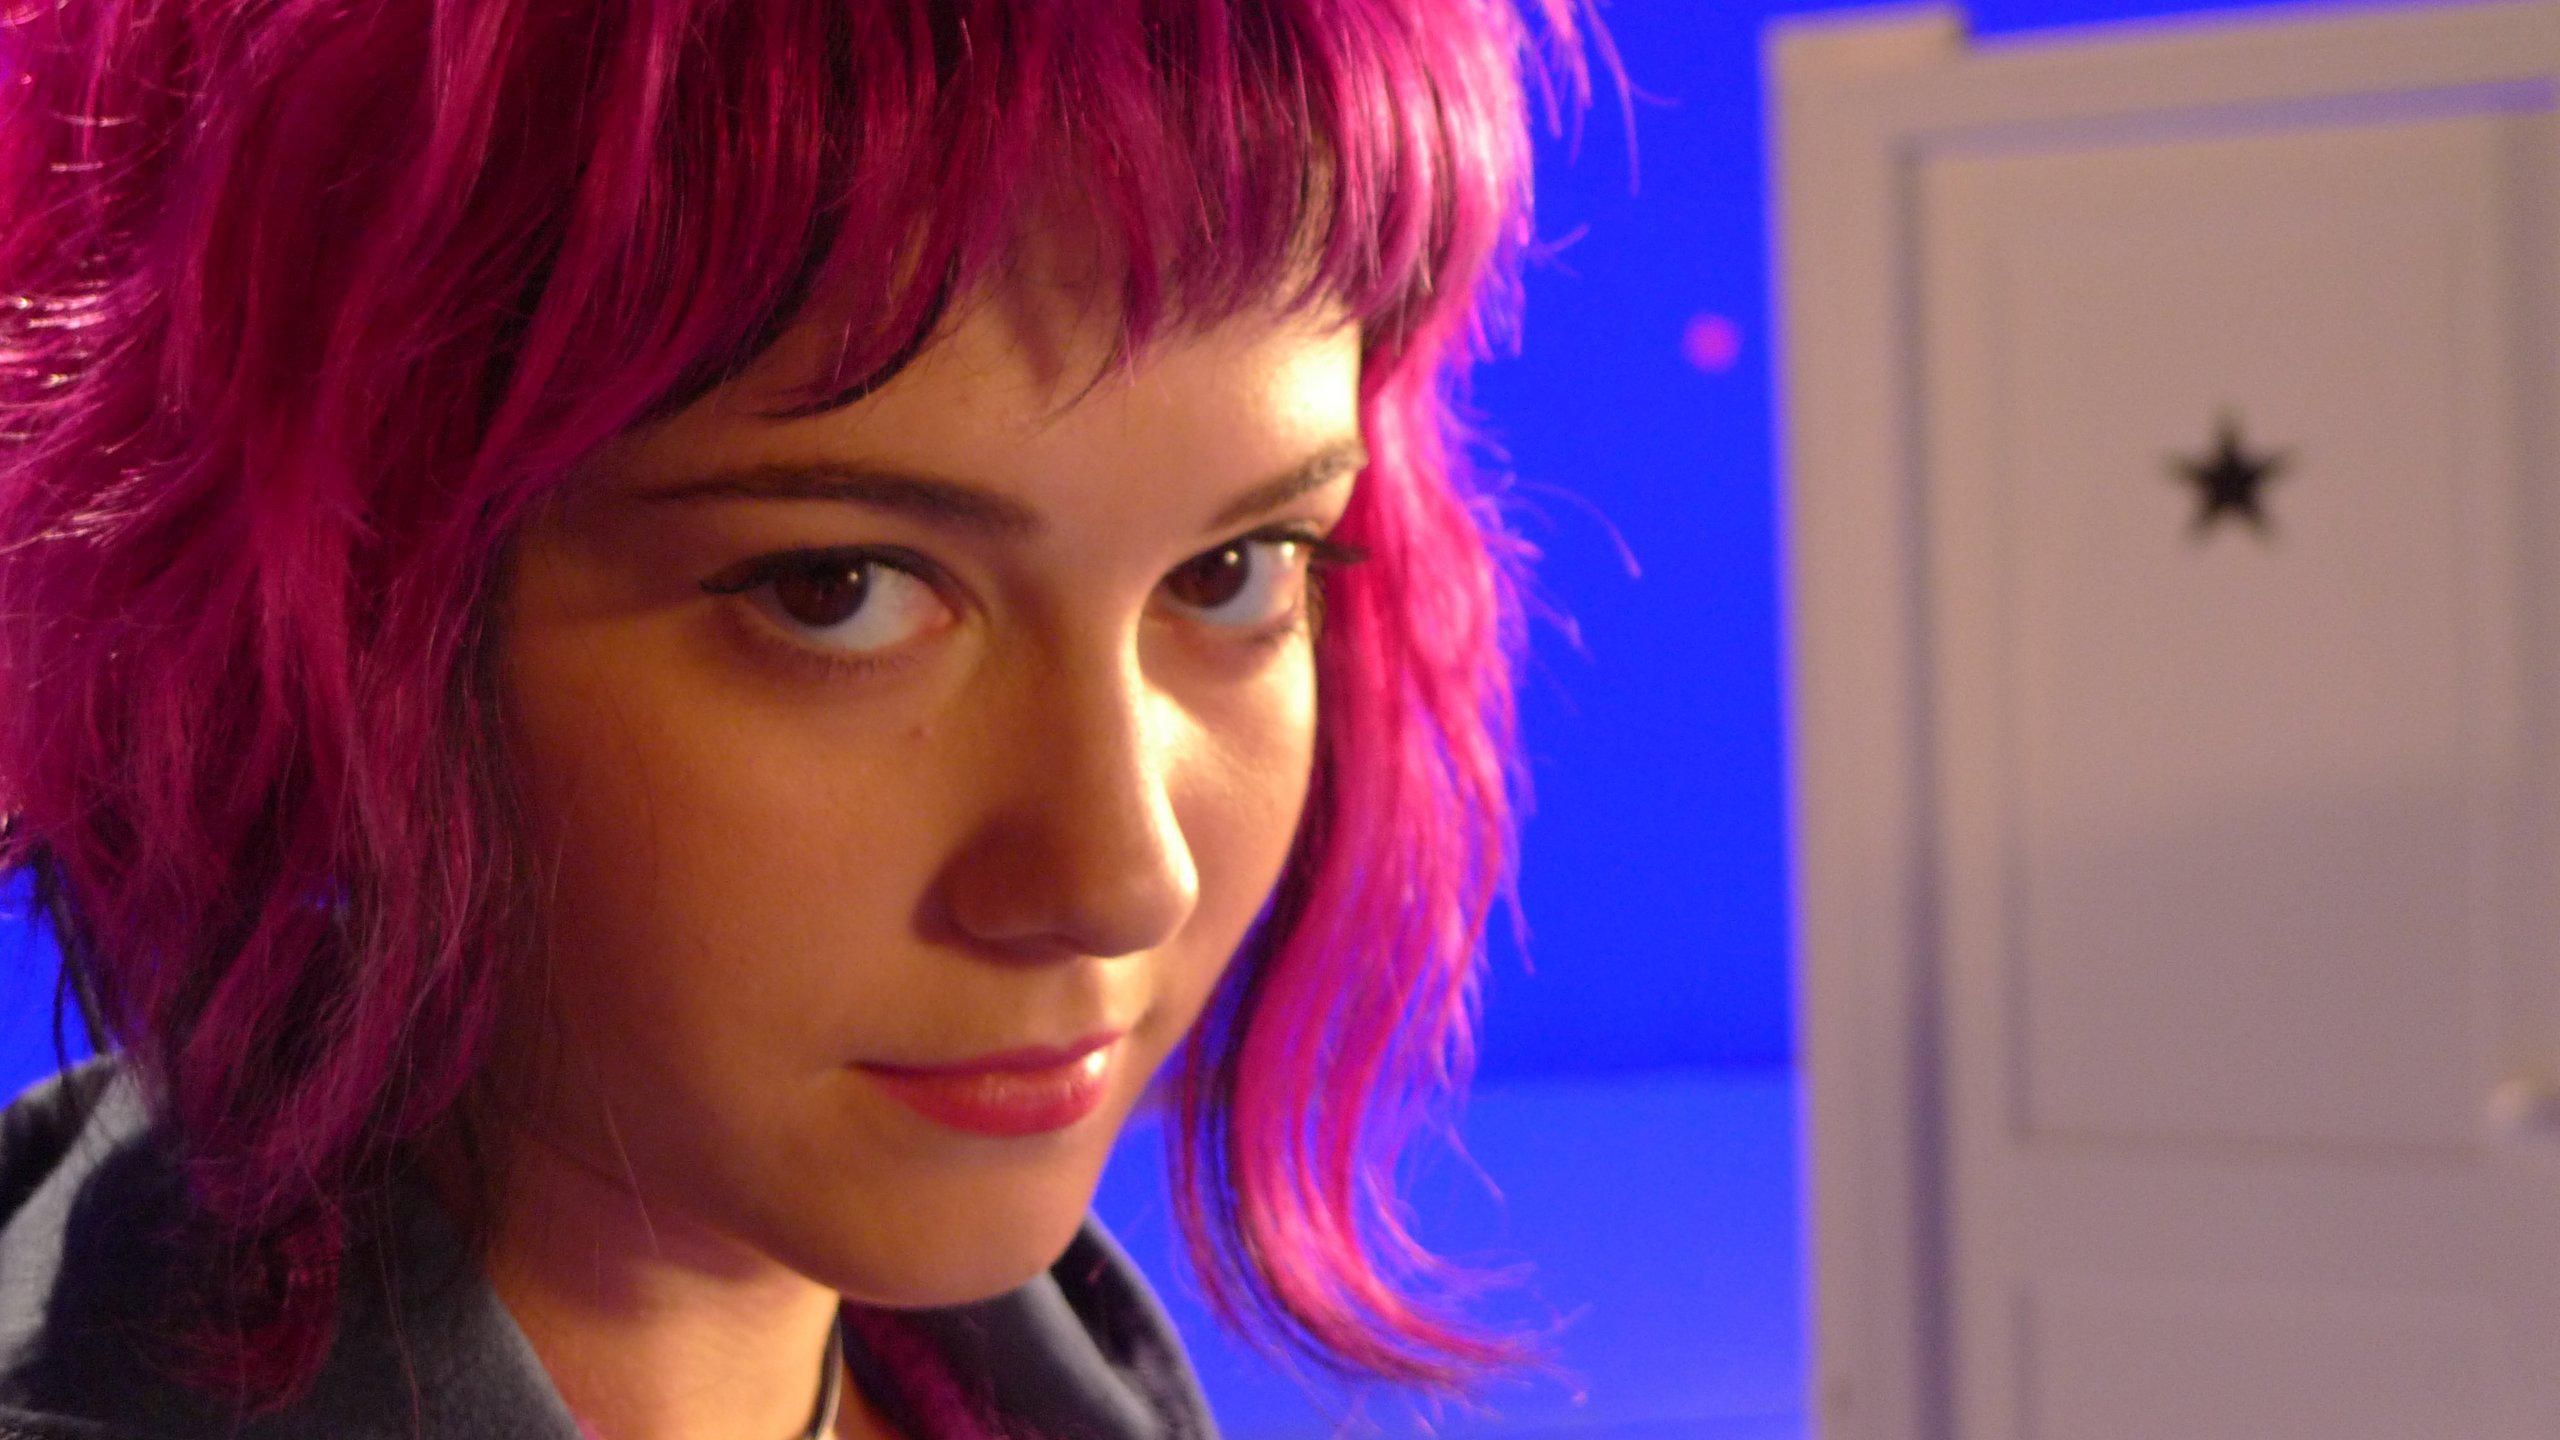 http://images2.fanpop.com/images/photos/7700000/Mary-Elizabeth-Winstead-as-Ramona-Flowers-in-Scott-Pilgrim-vs-The-World-mary-elizabeth-winstead-7743435-2560-1440.jpg